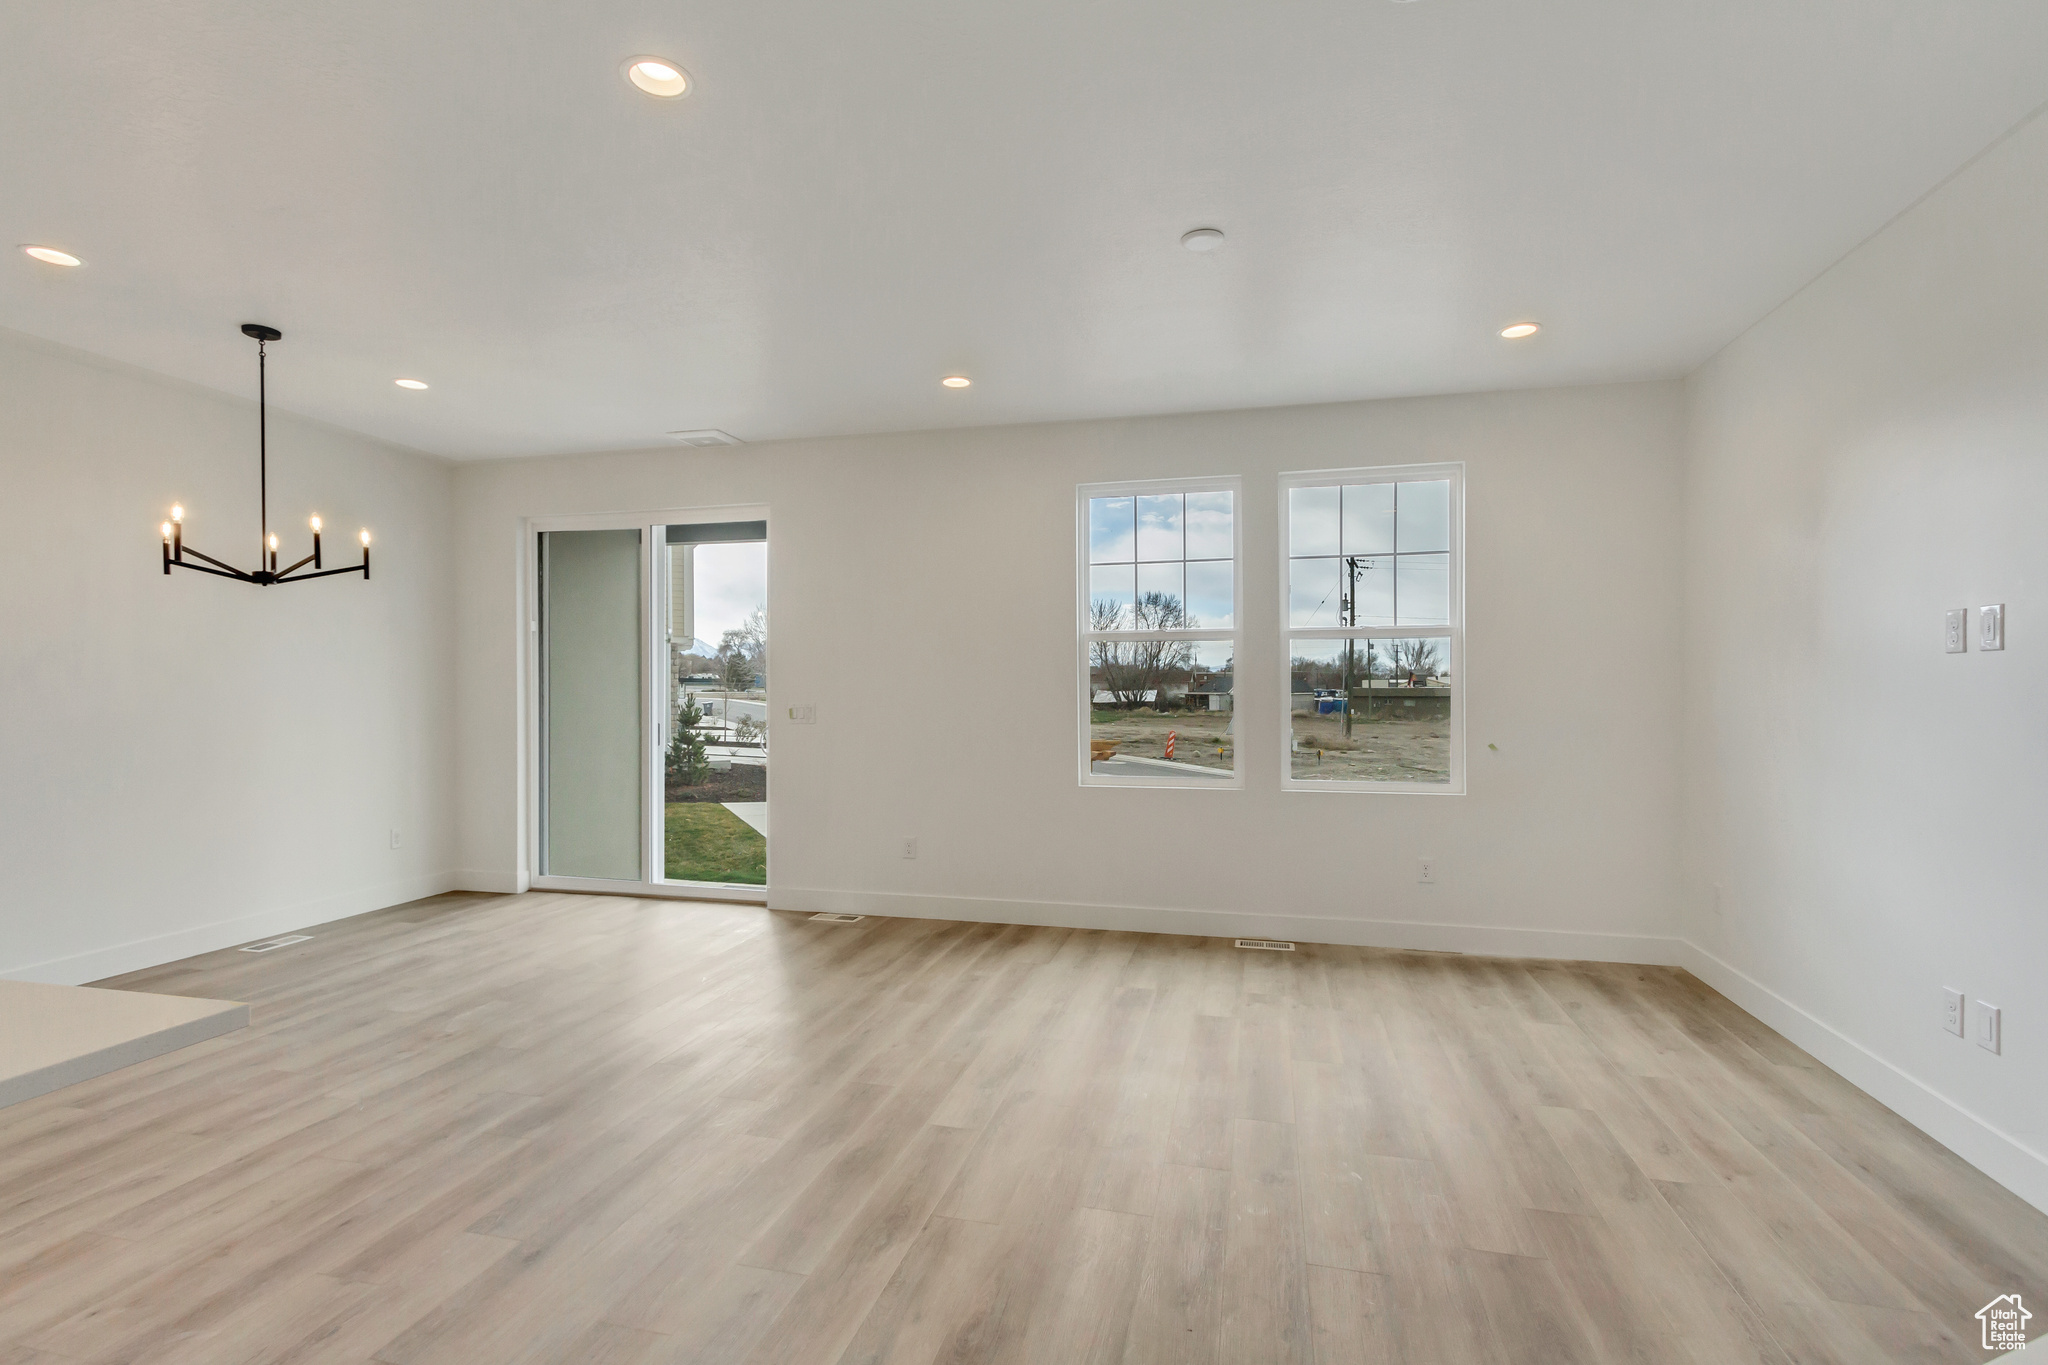 Unfurnished room featuring a chandelier, a healthy amount of sunlight, and light hardwood / wood-style floors